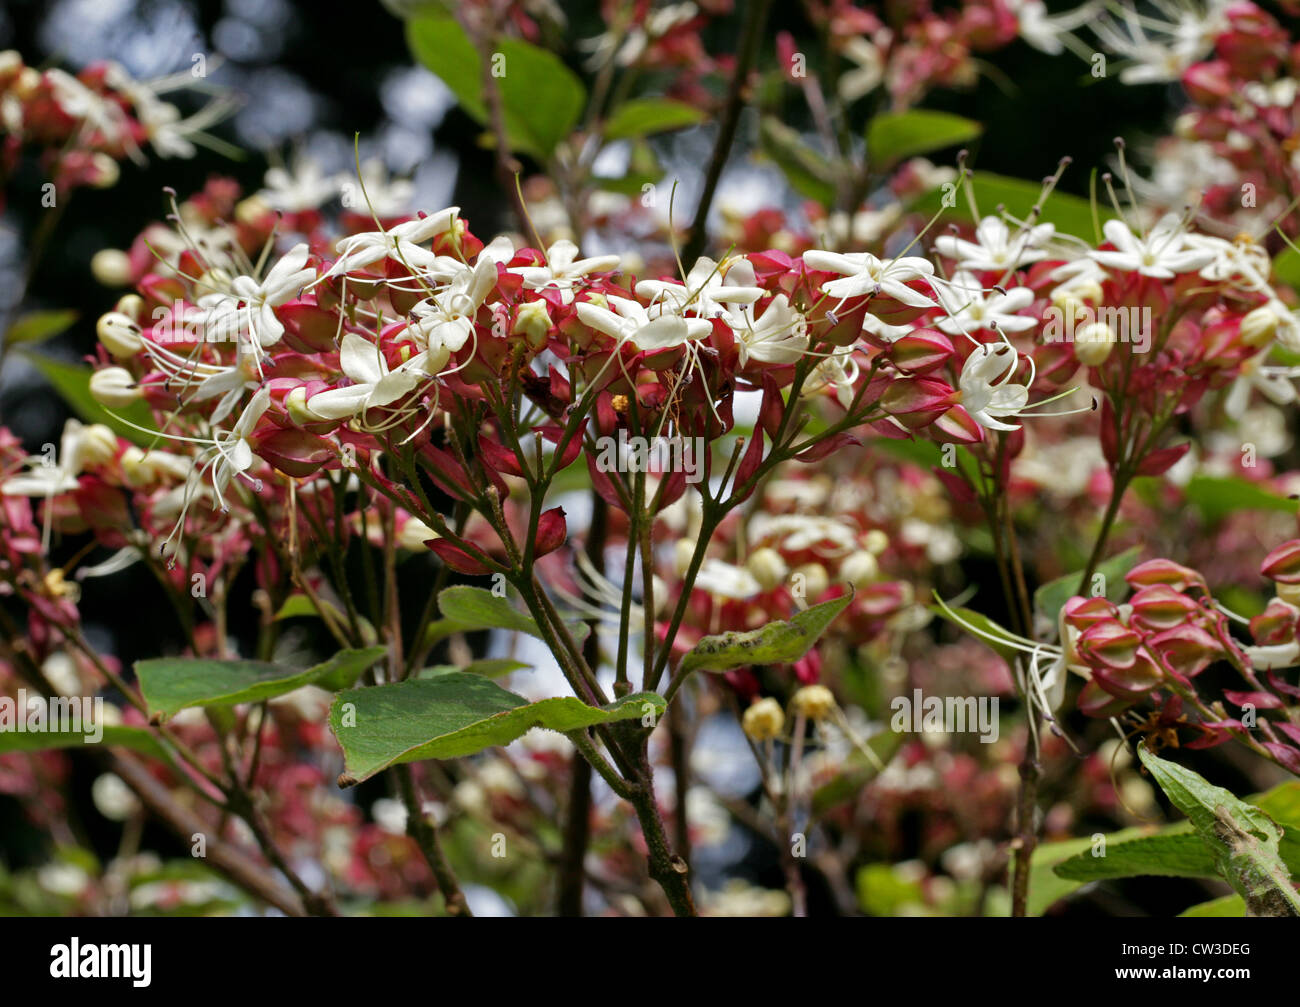 Harlequin Glory Bower, Japanese Clerodendrum, Peanut Butter Shrub, Clerodendrum trichotomum, Lamiaceae. China and Japan. Stock Photo